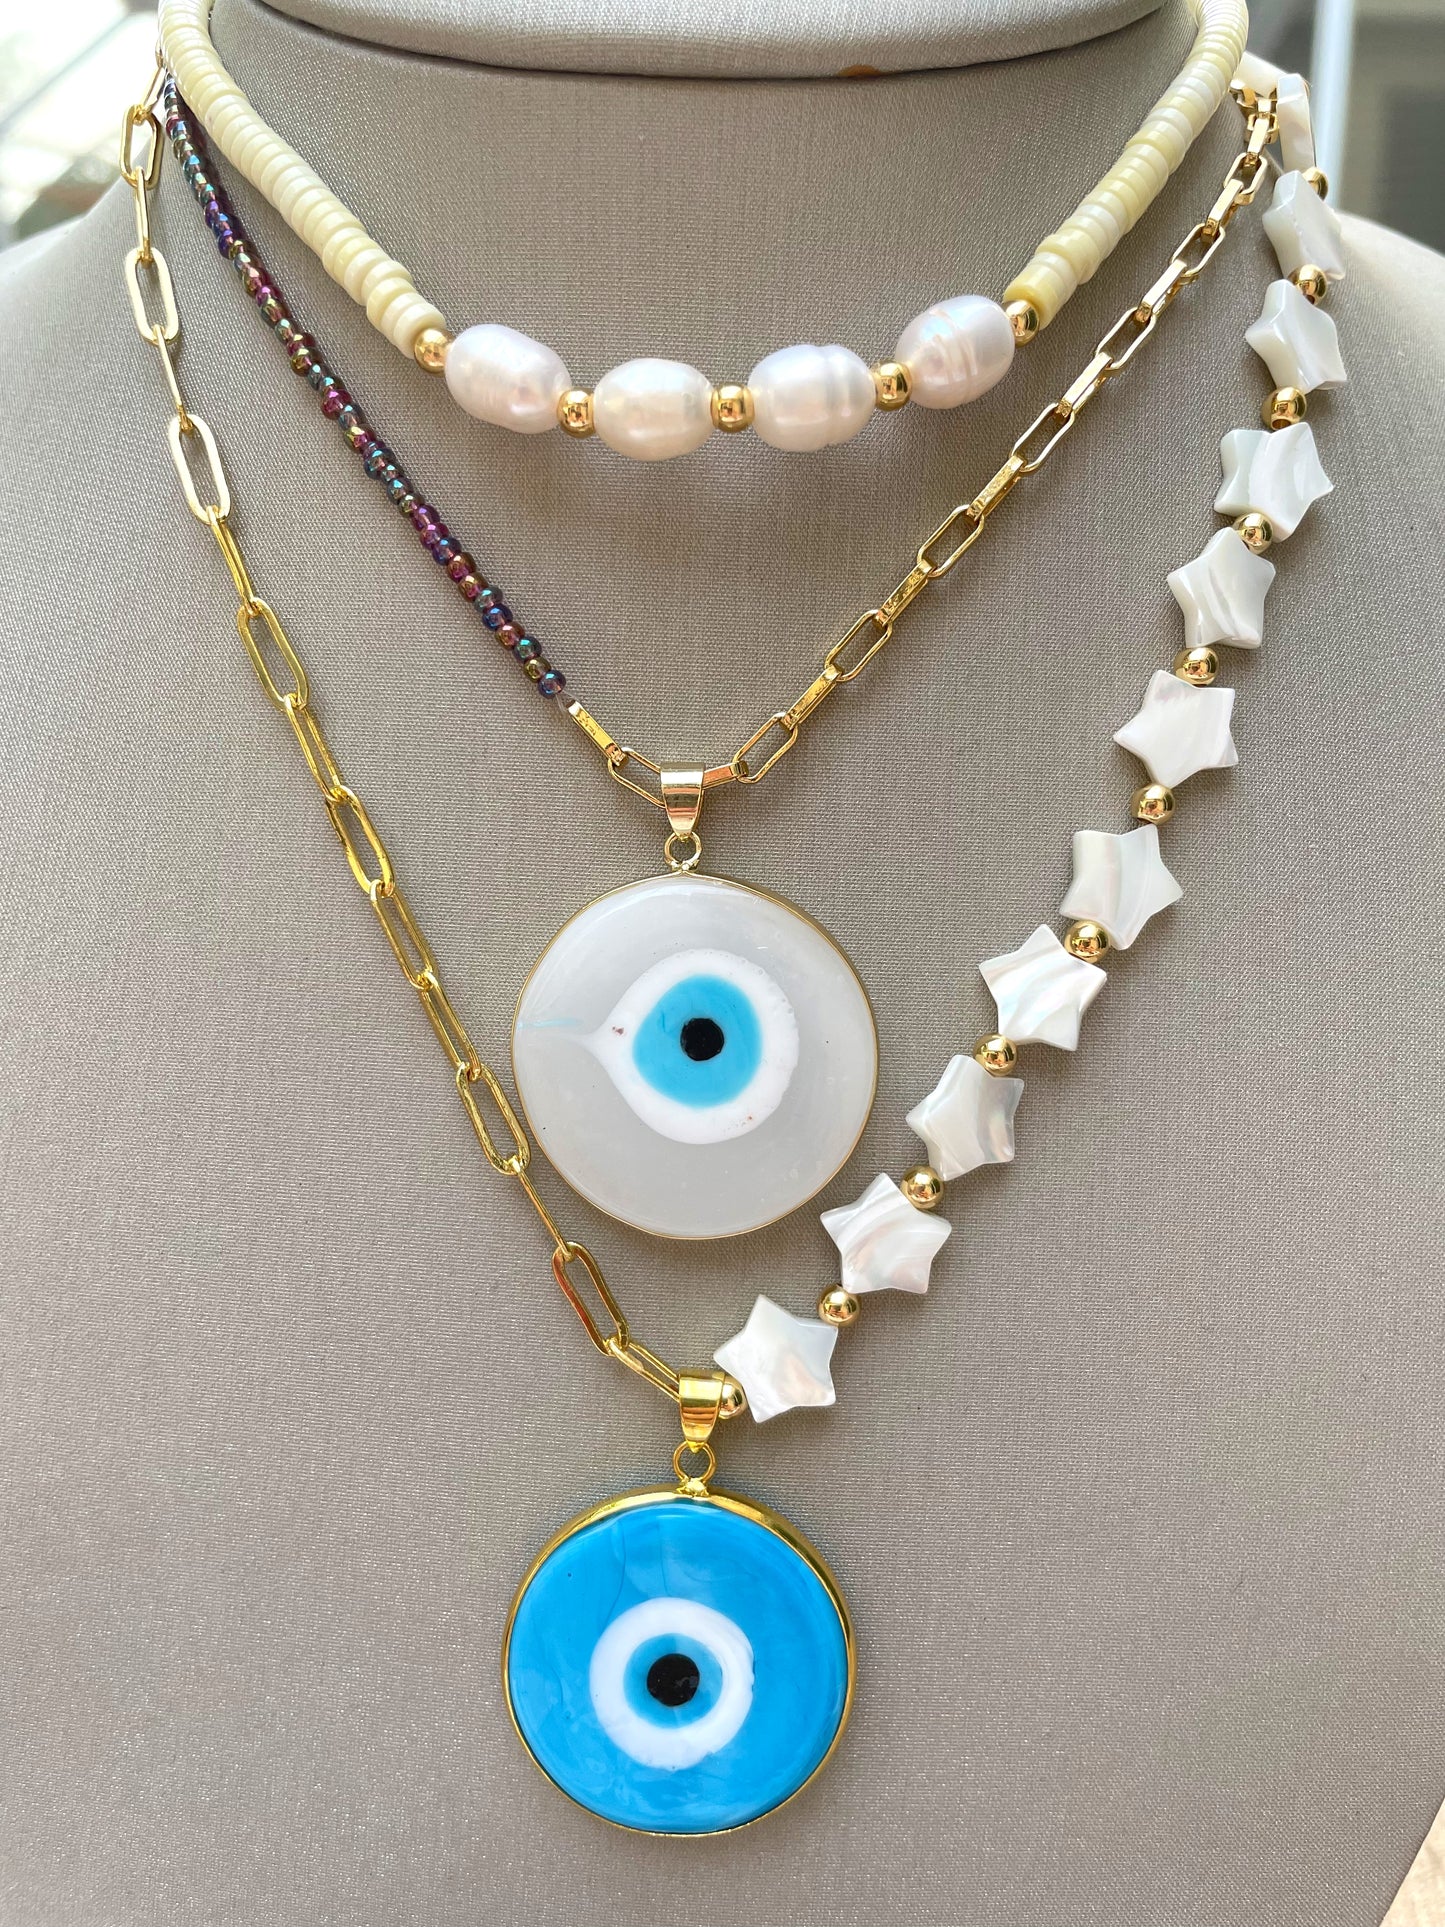 Half and half Link and stars evil eye pendant necklace